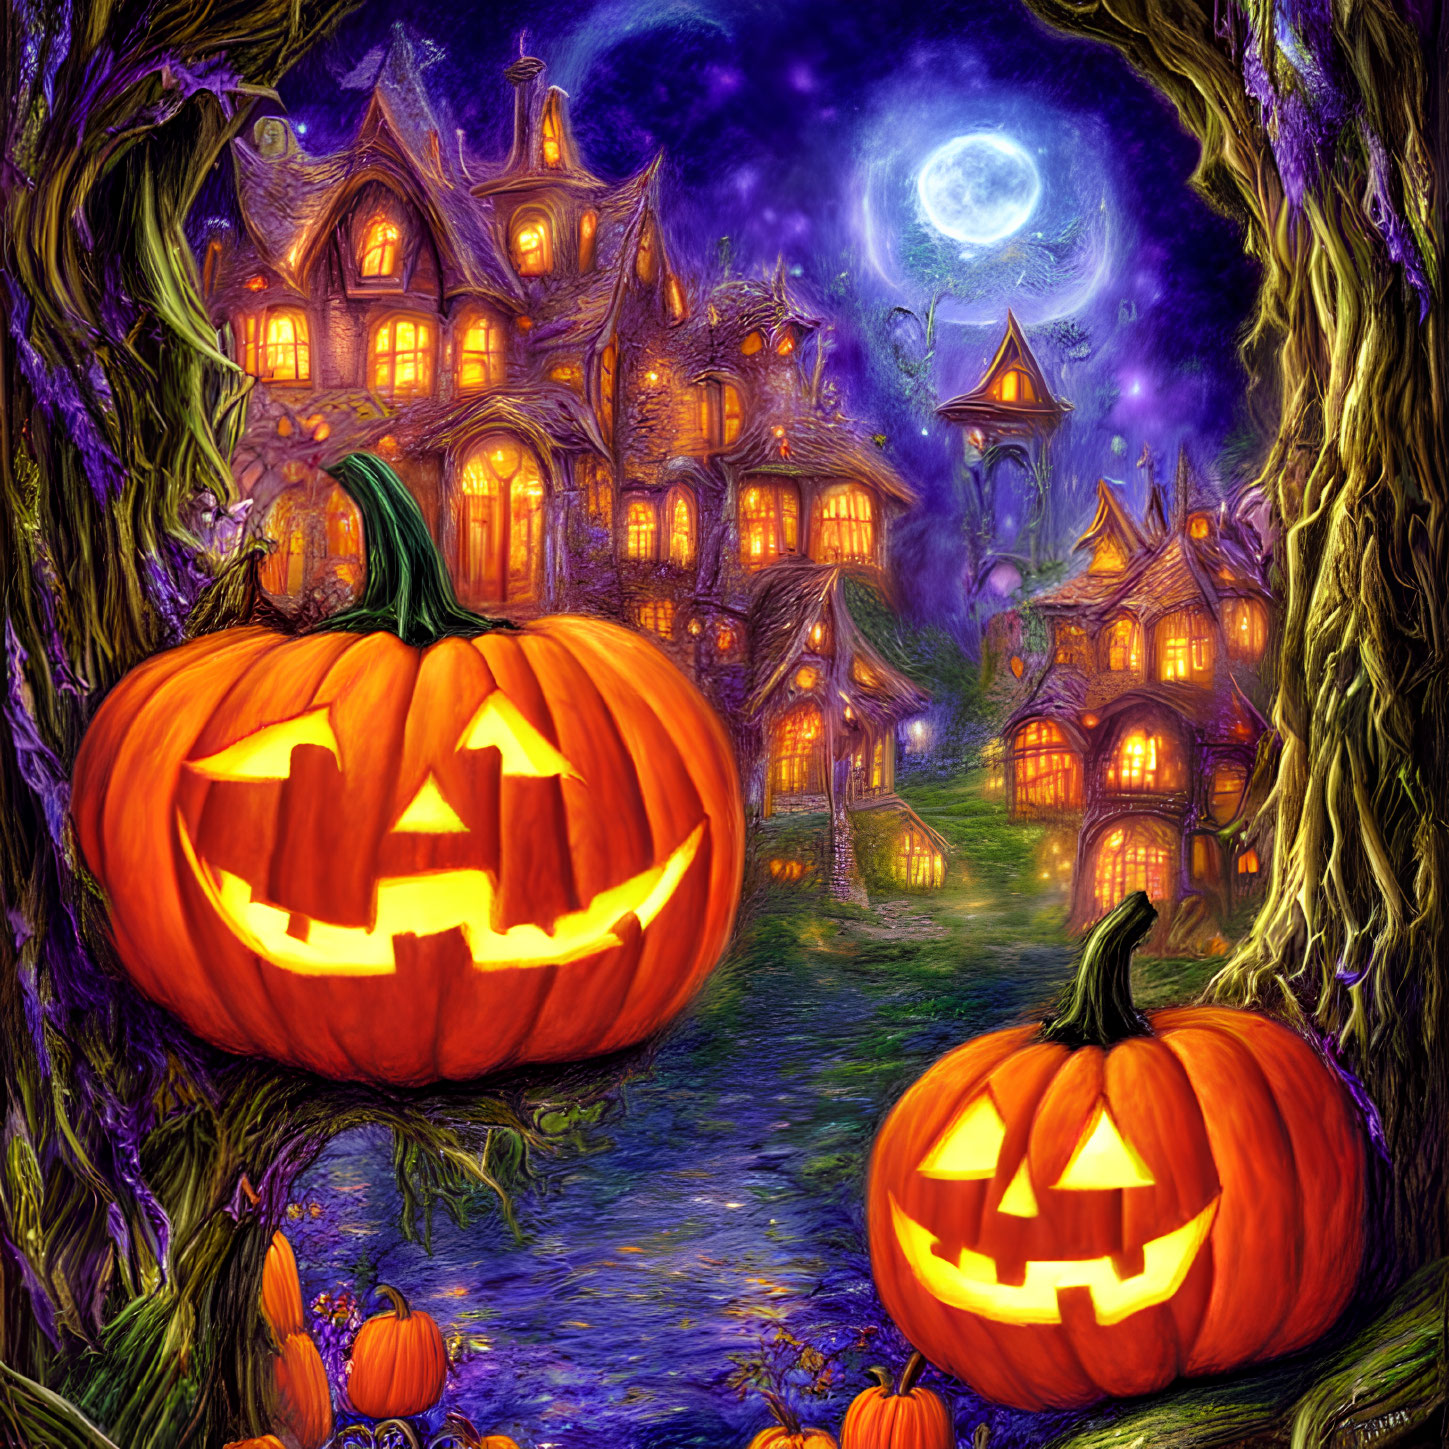 Vibrant Halloween scene with carved pumpkins, spooky houses, and twisted trees under a full moon